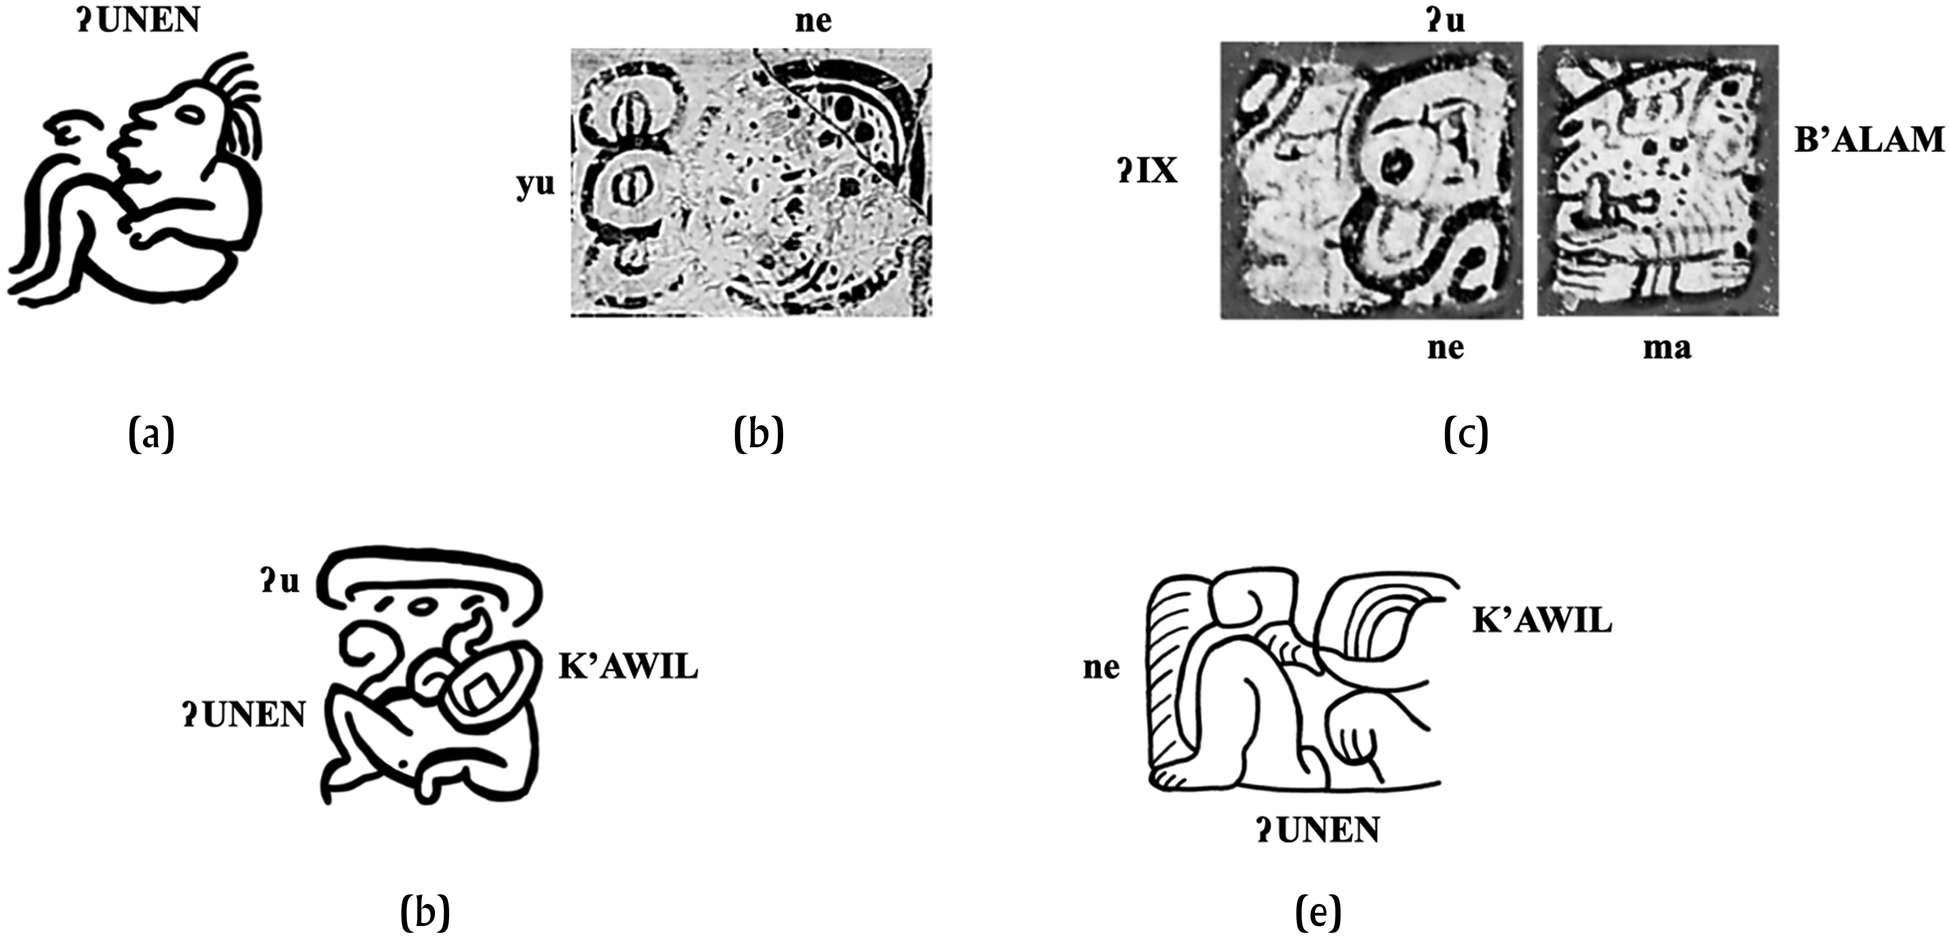 The duplication diacritic: A case study of variation and change in Mayan  writing | Ancient Mesoamerica | Cambridge Core